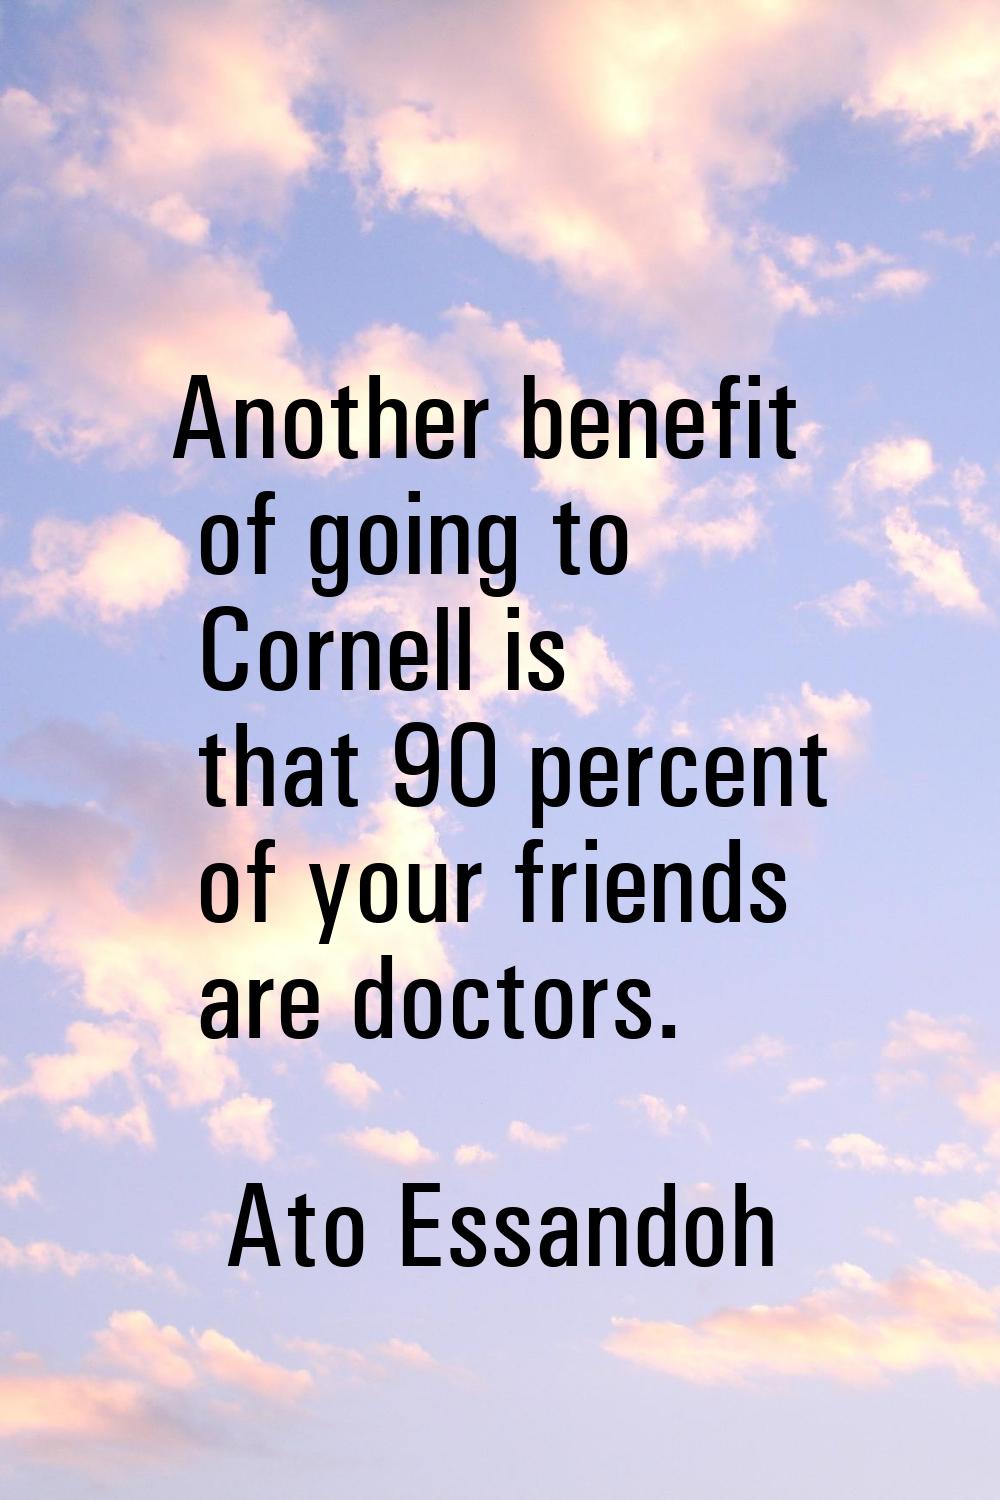 Another benefit of going to Cornell is that 90 percent of your friends are doctors.